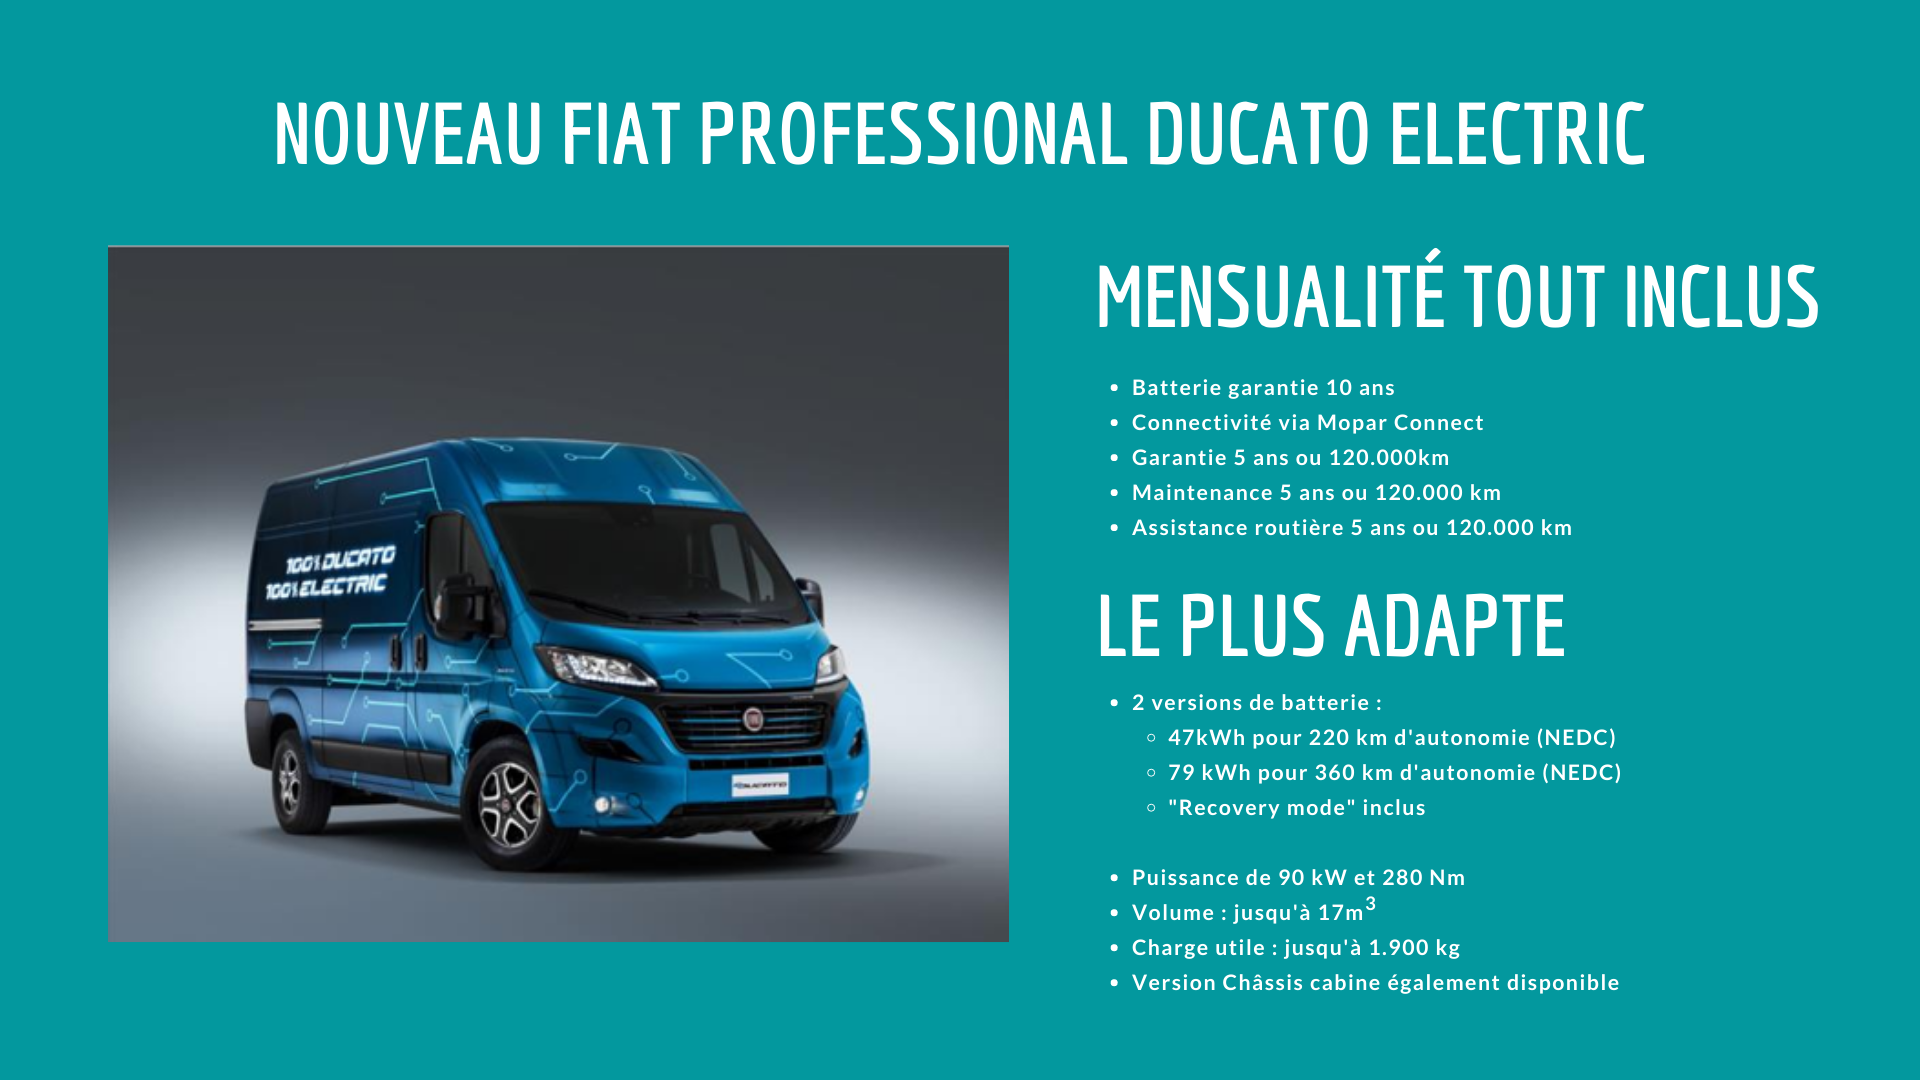 ducato electric fiat professionnal utilitaires camion yvelines